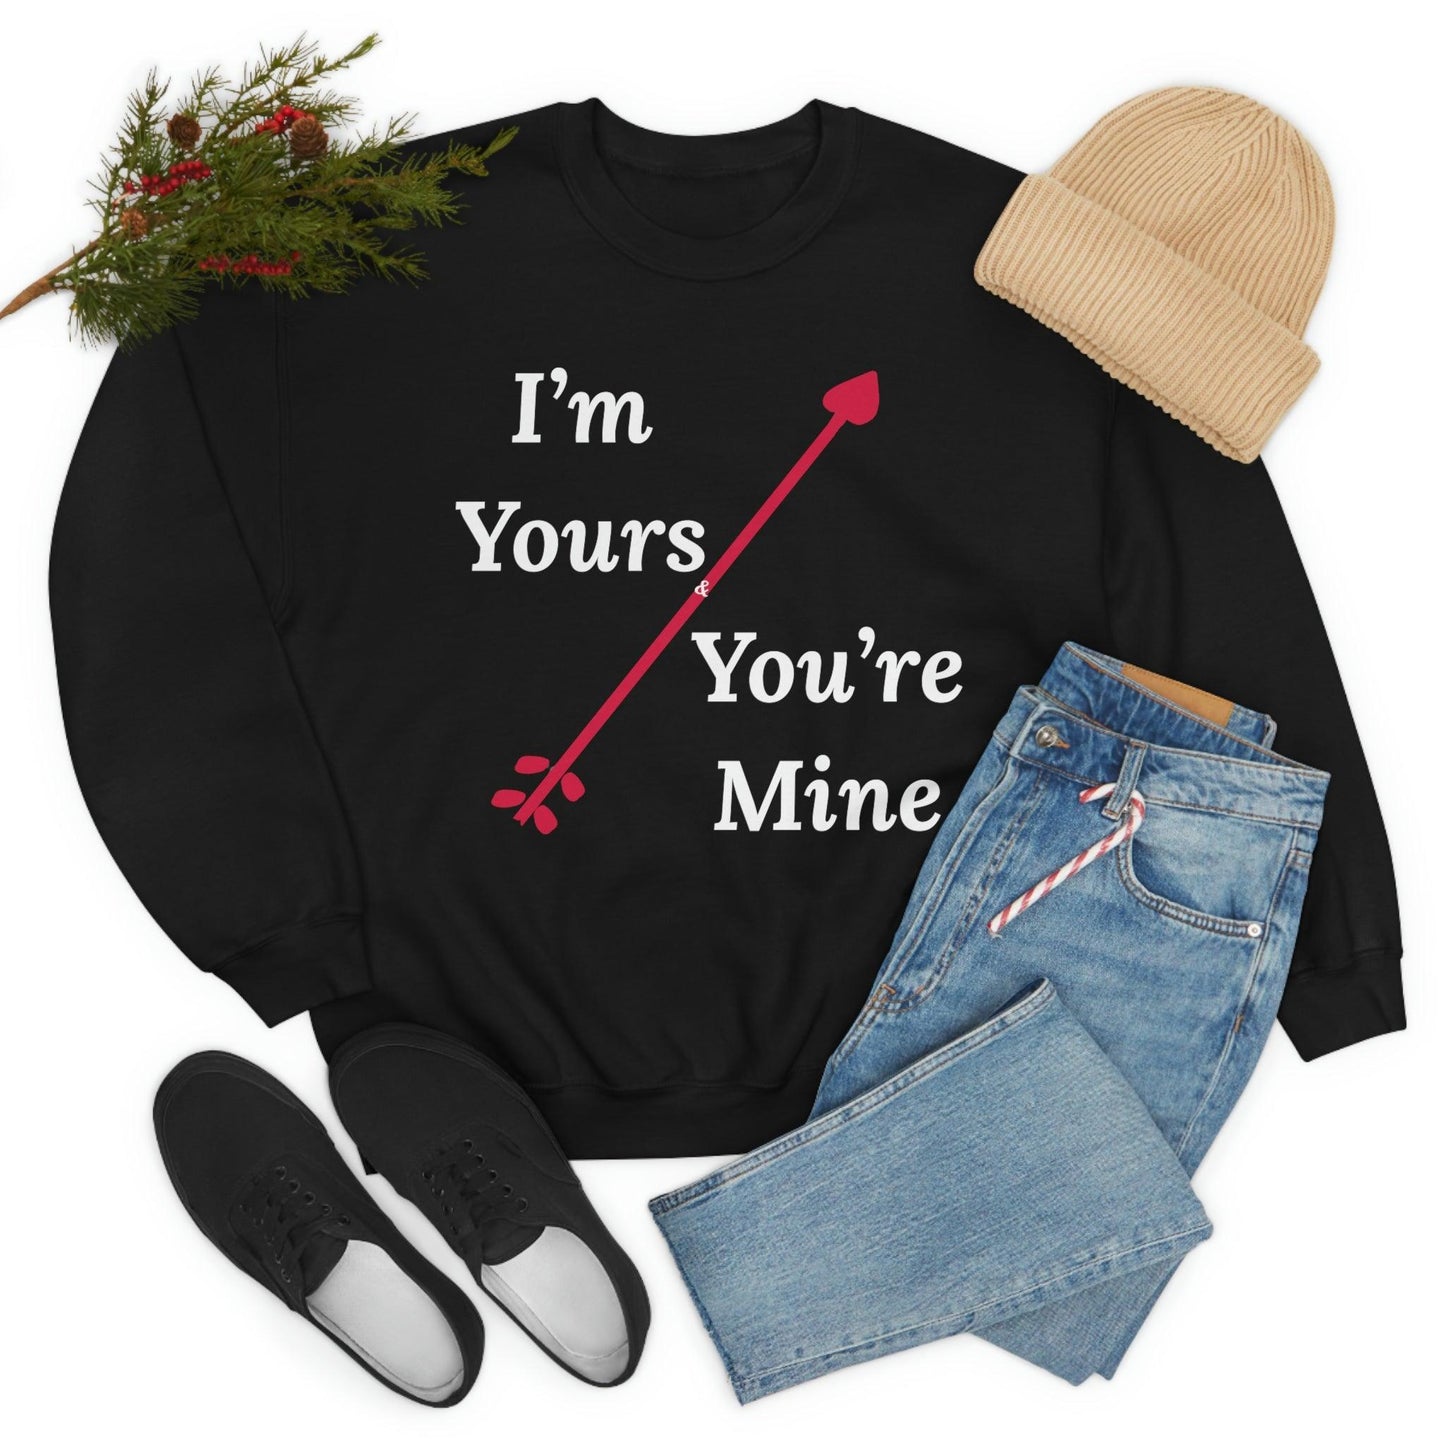 I'm Yours and You're Mine Sweatshirt - Giftsmojo